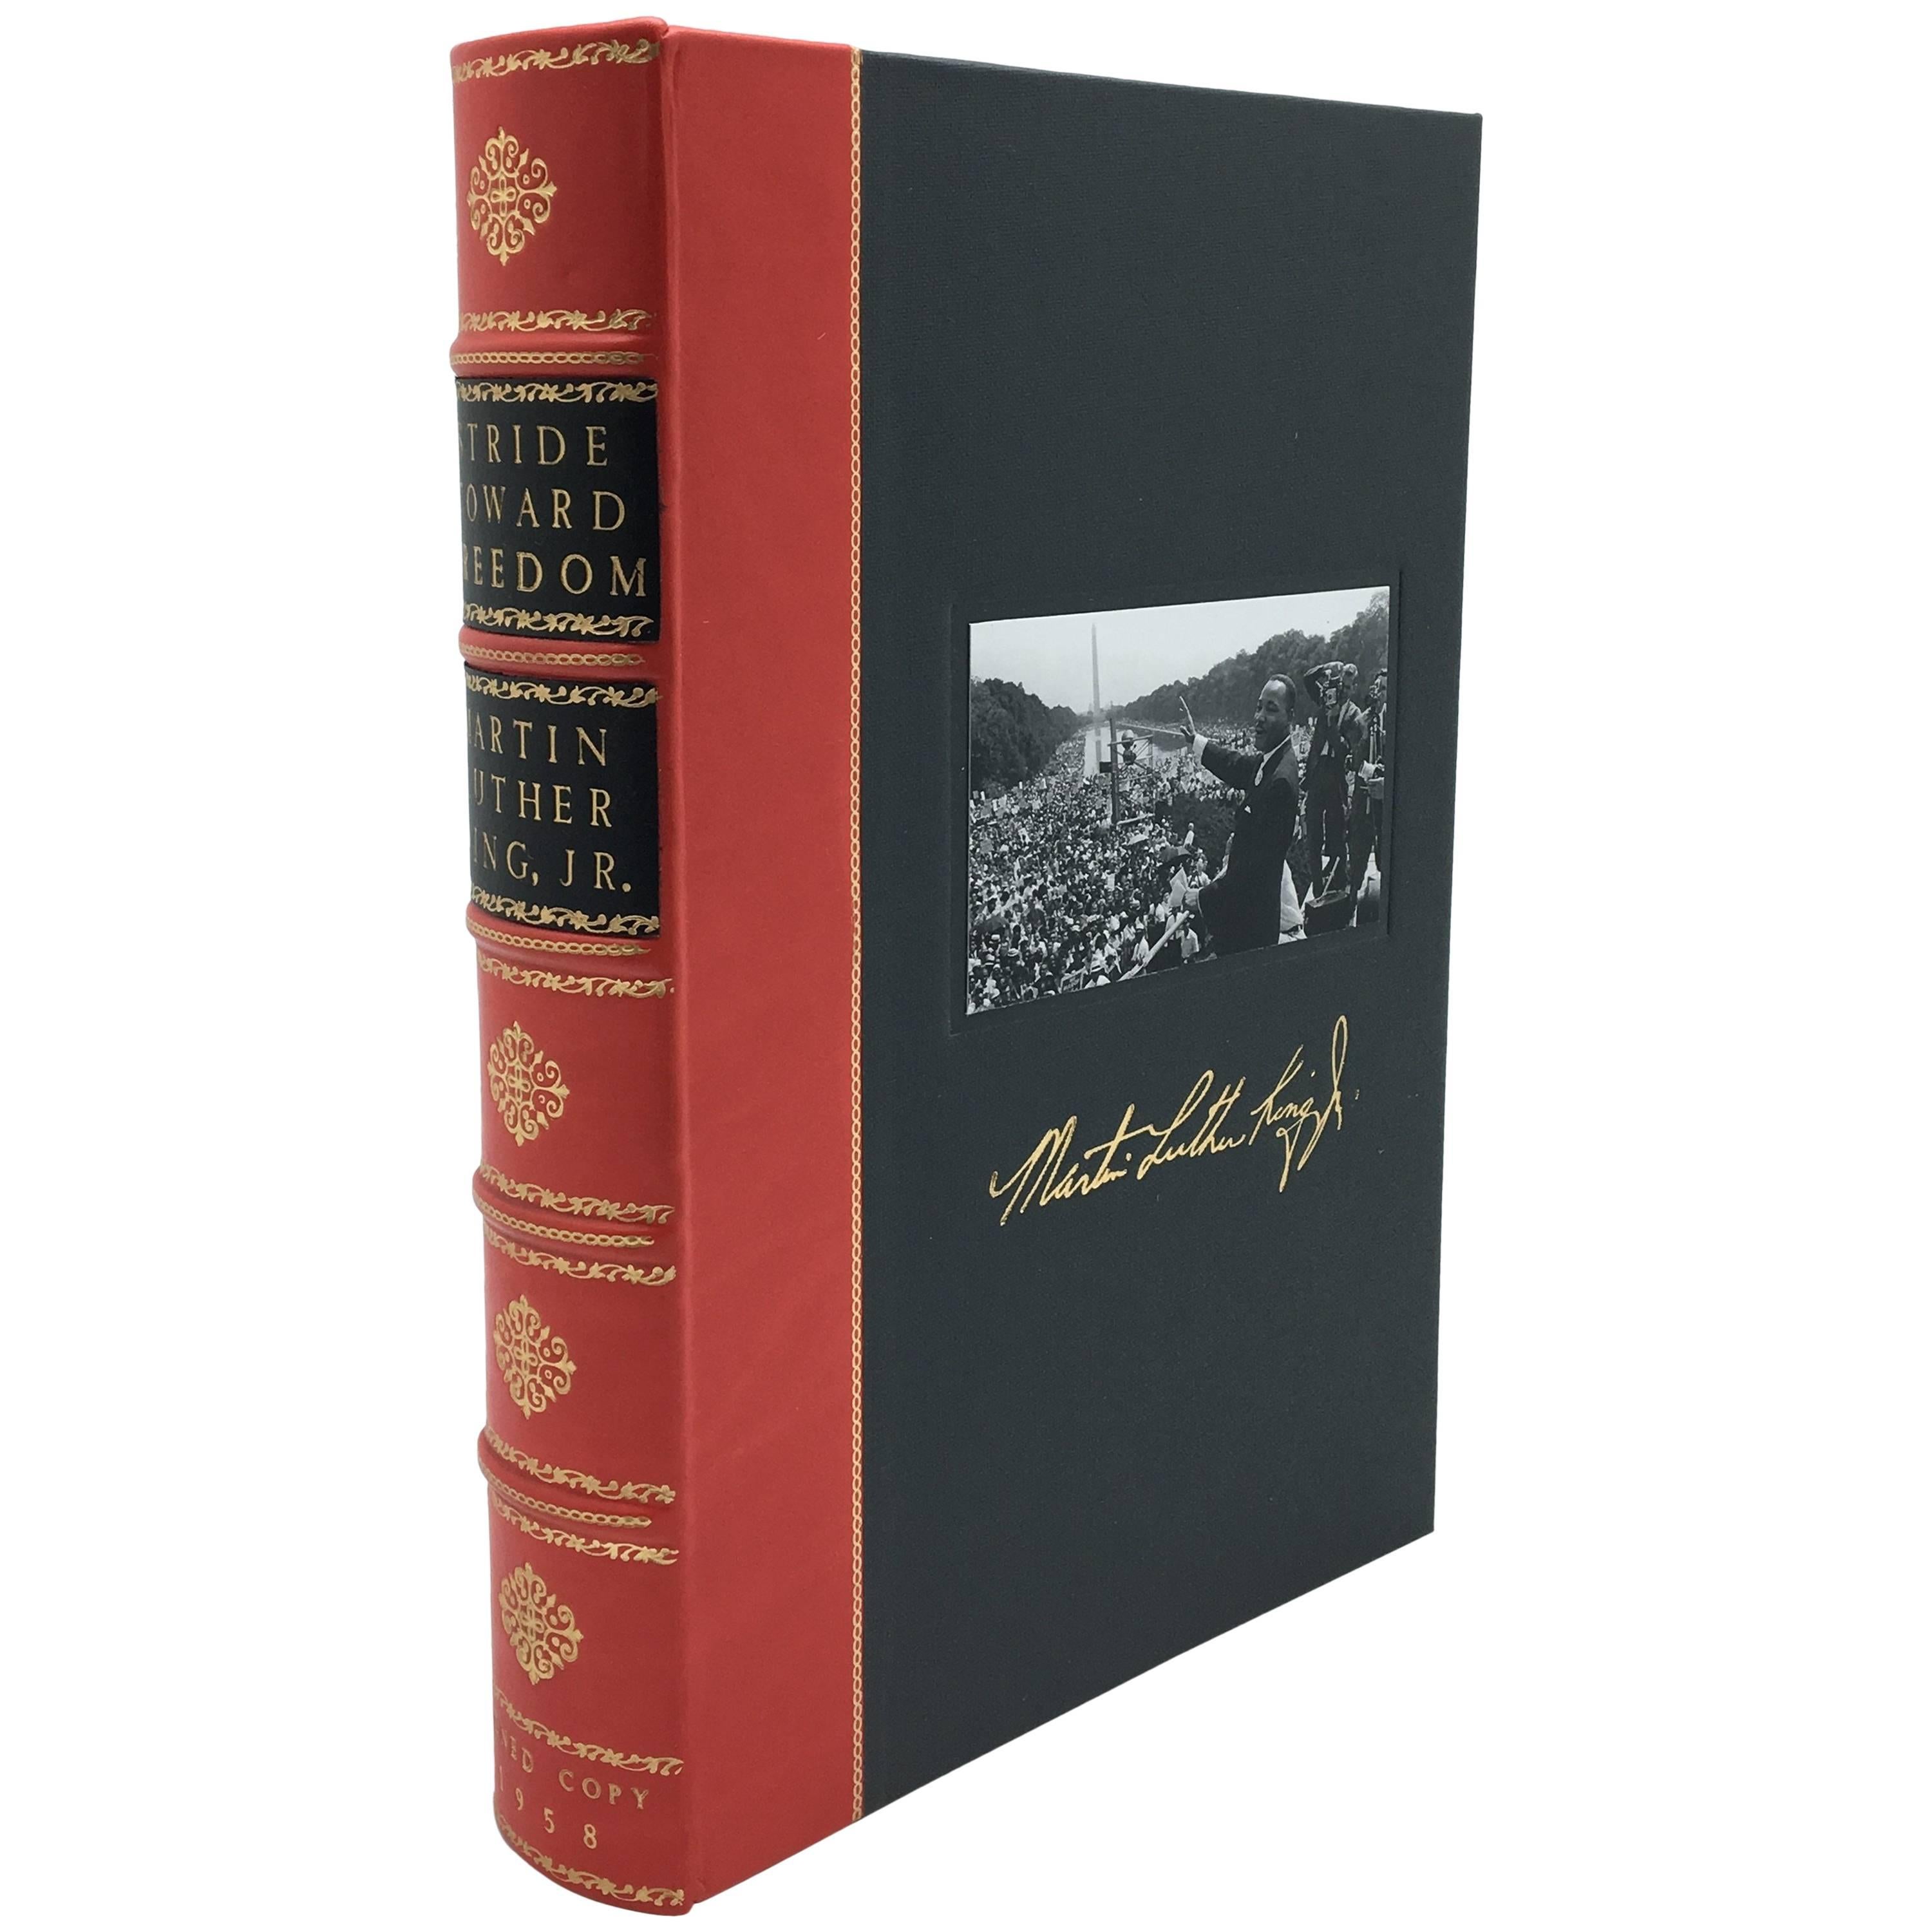 "Stride Toward Freedom", Signed by Dr. Martin Luther King, First Edition, 1958